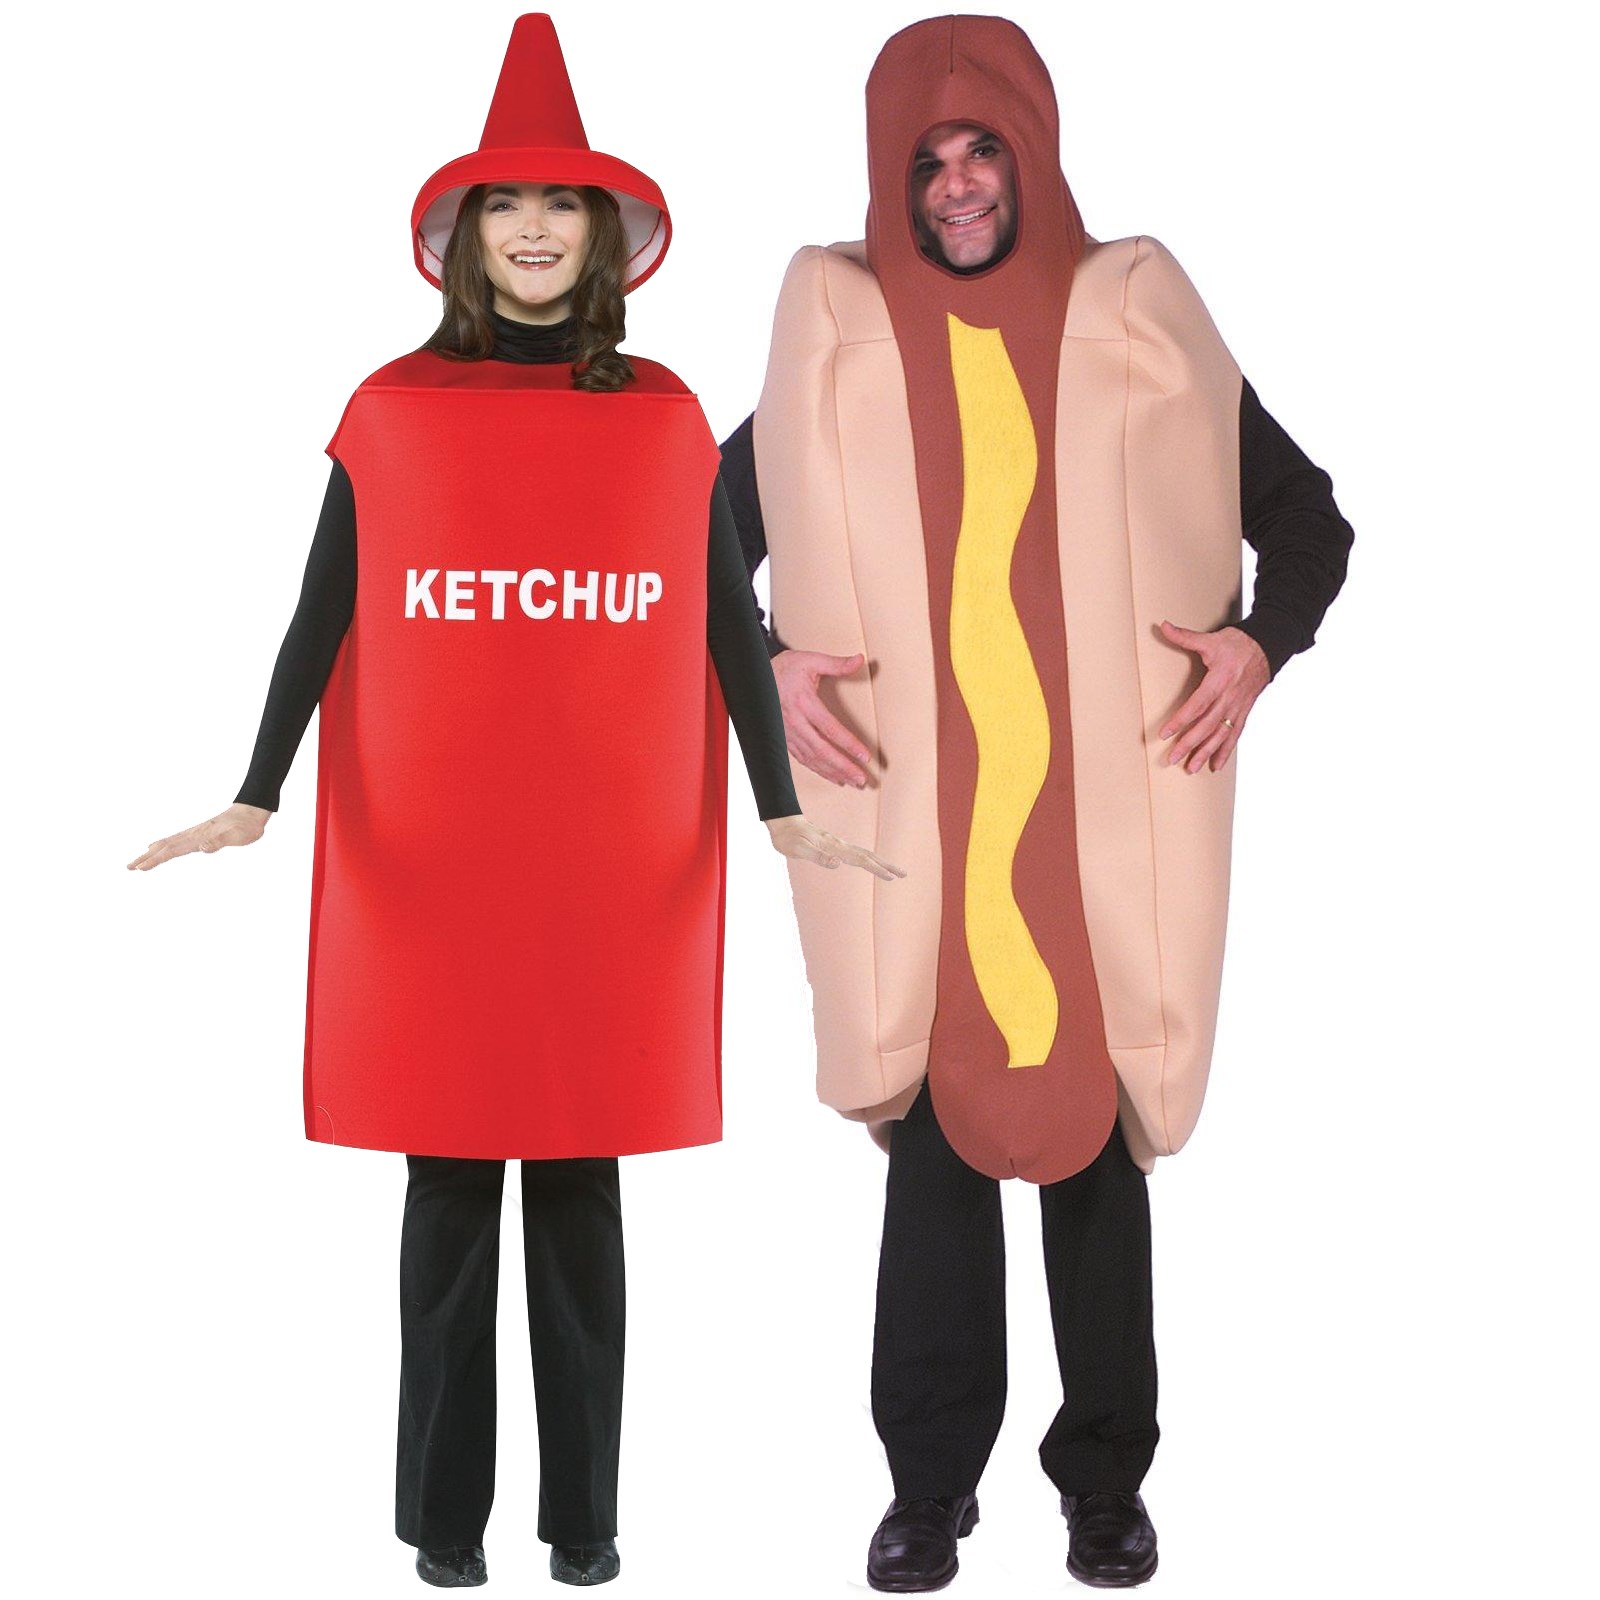 Hot Dog & Ketchup Adult Couples Costume